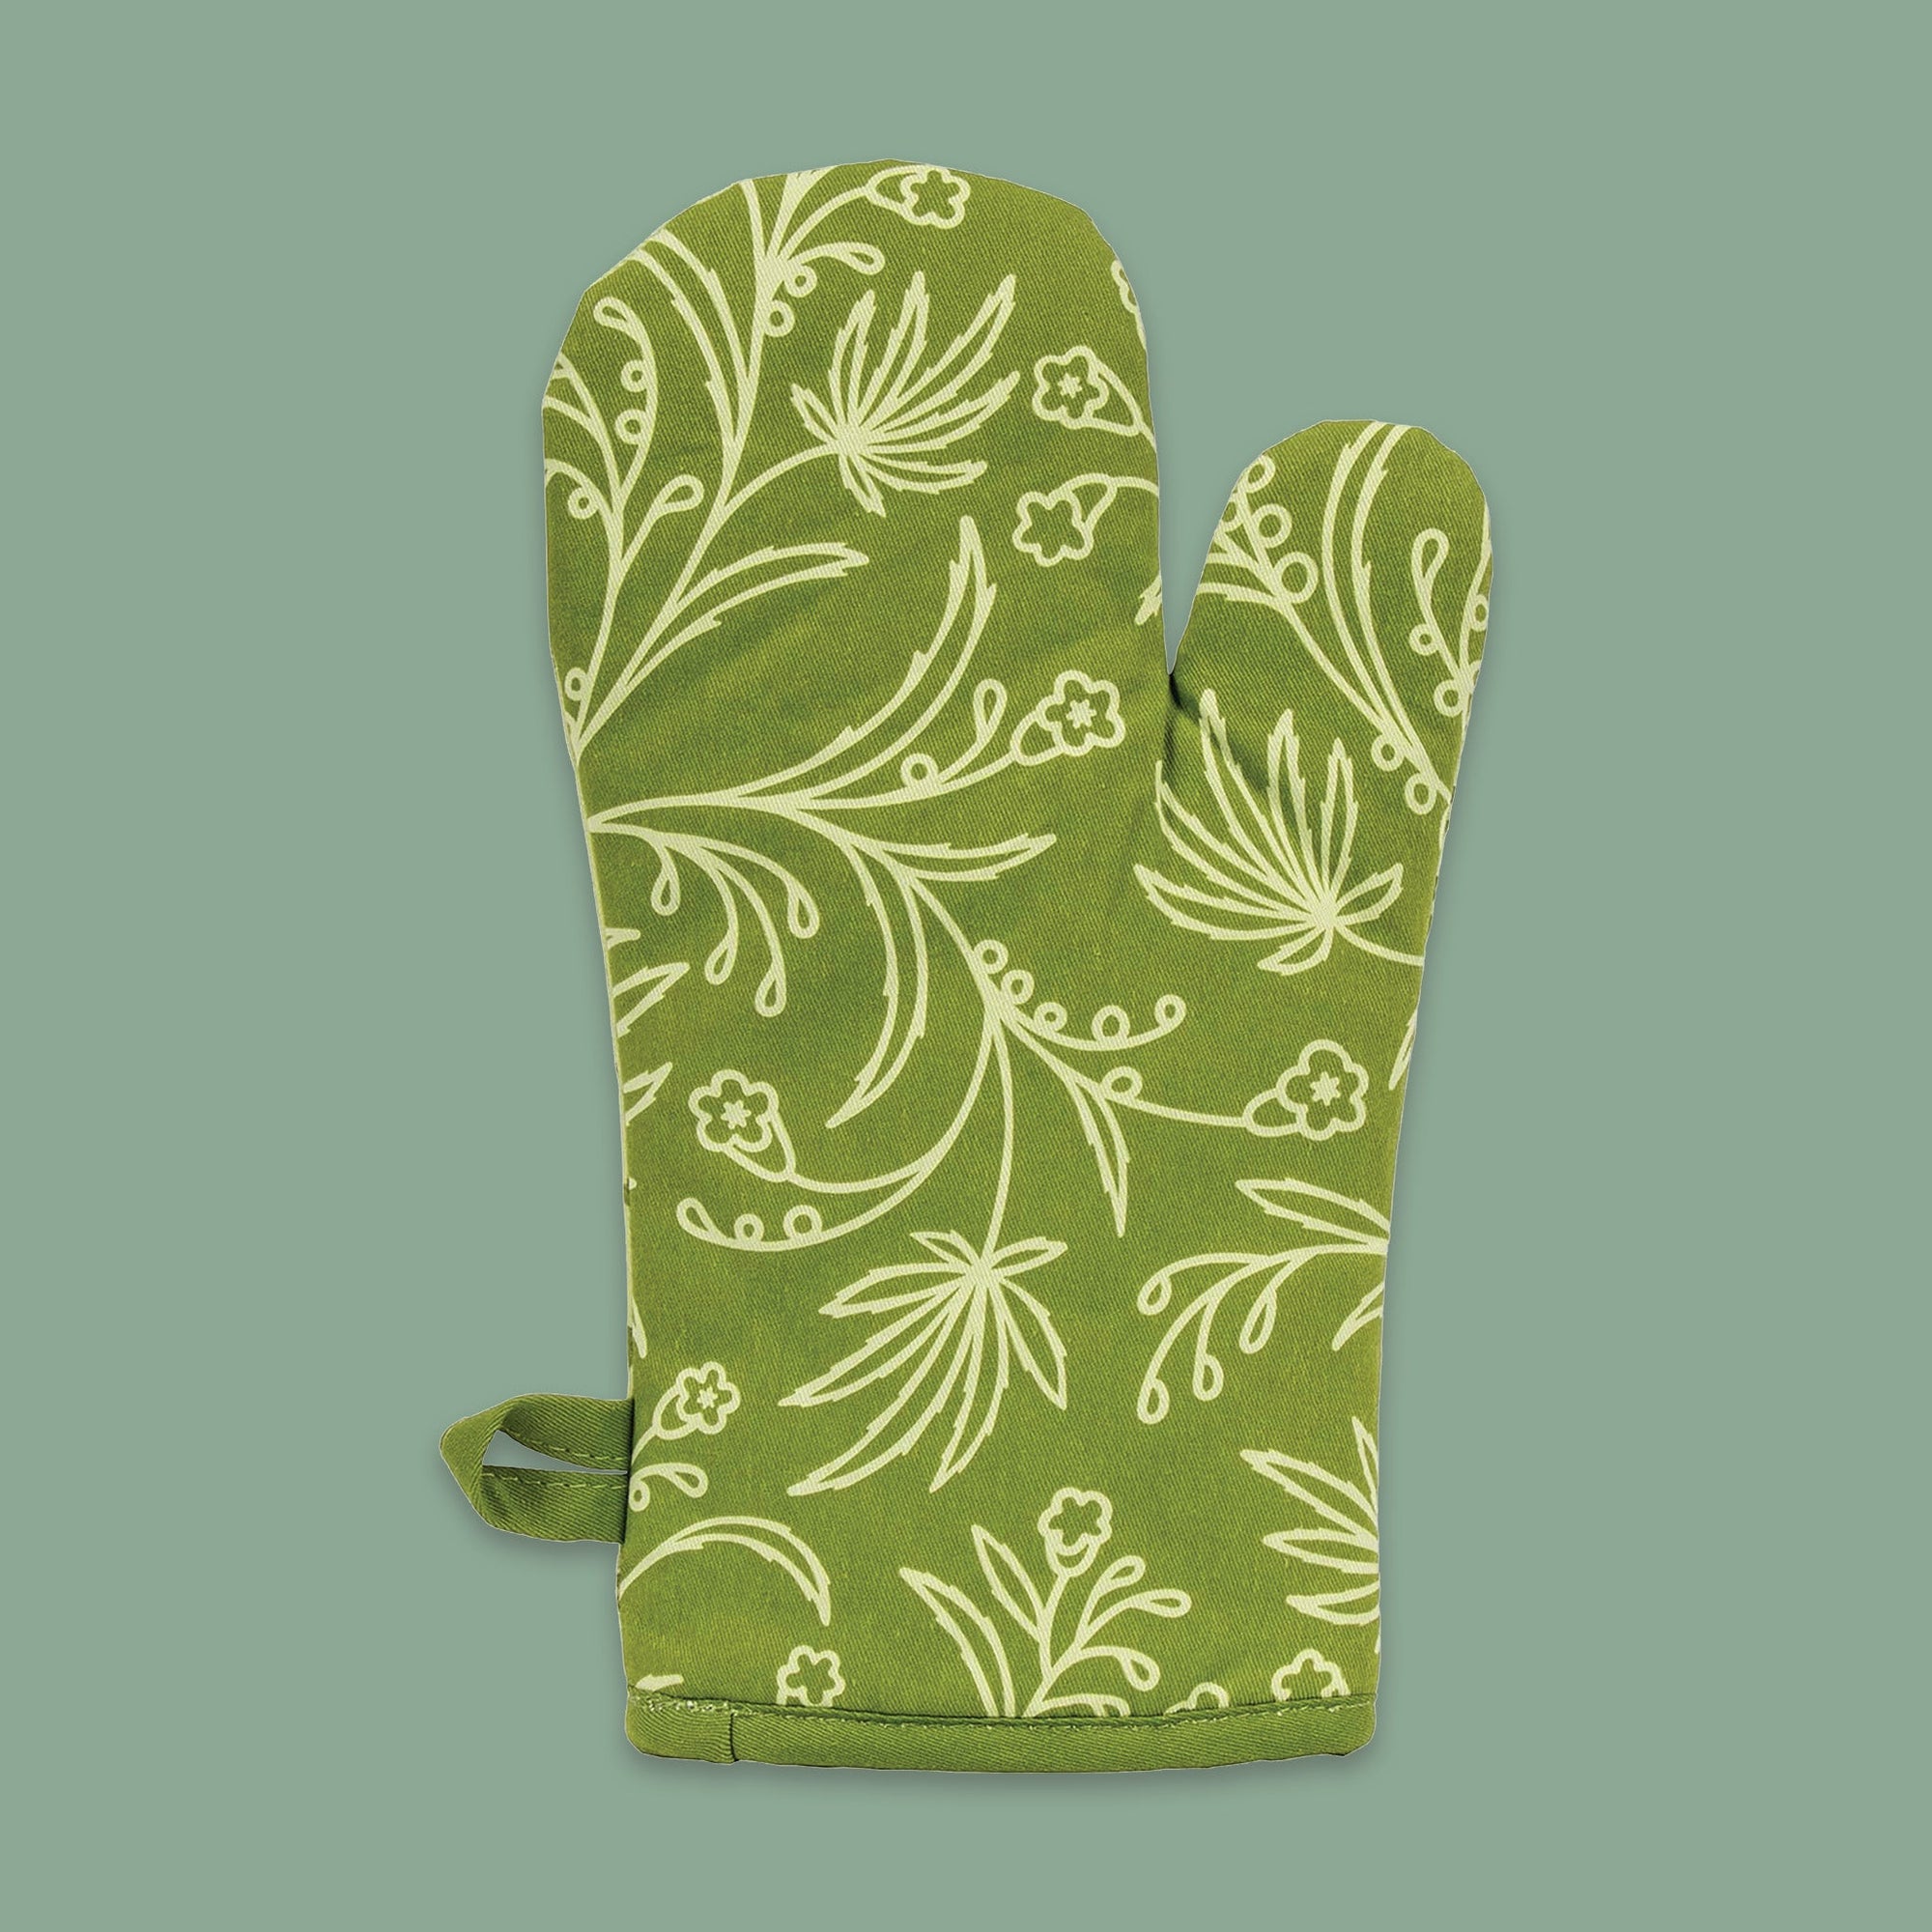 On a moss green background sits an oven mitt. The back of this green oven mitt has illustrations of celery green marijuana leaves and flowers on it.